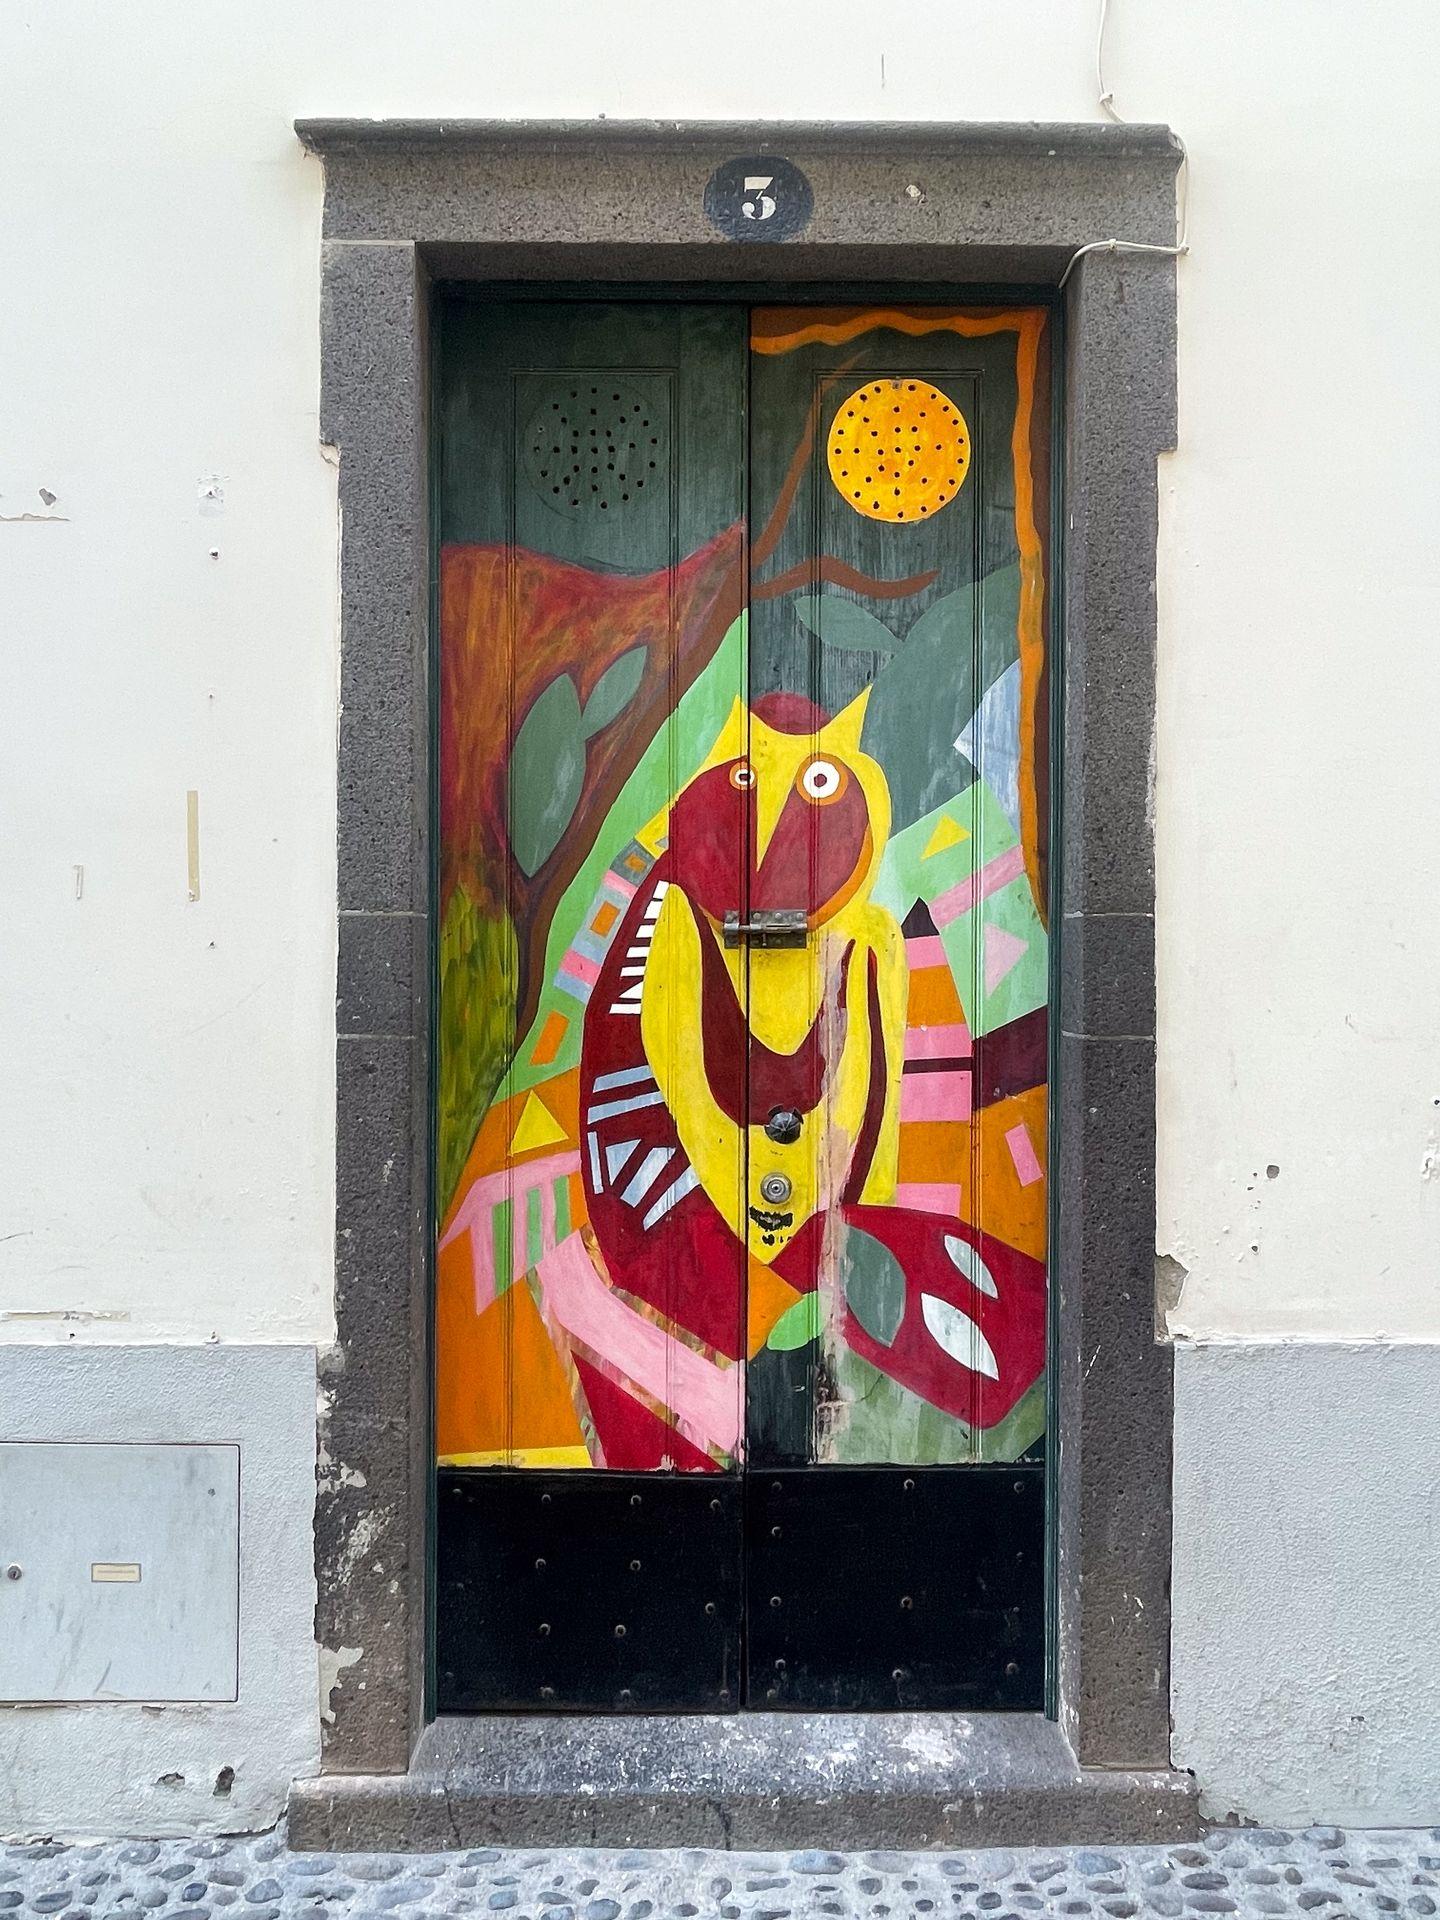 A door painted with colorful abstract art.